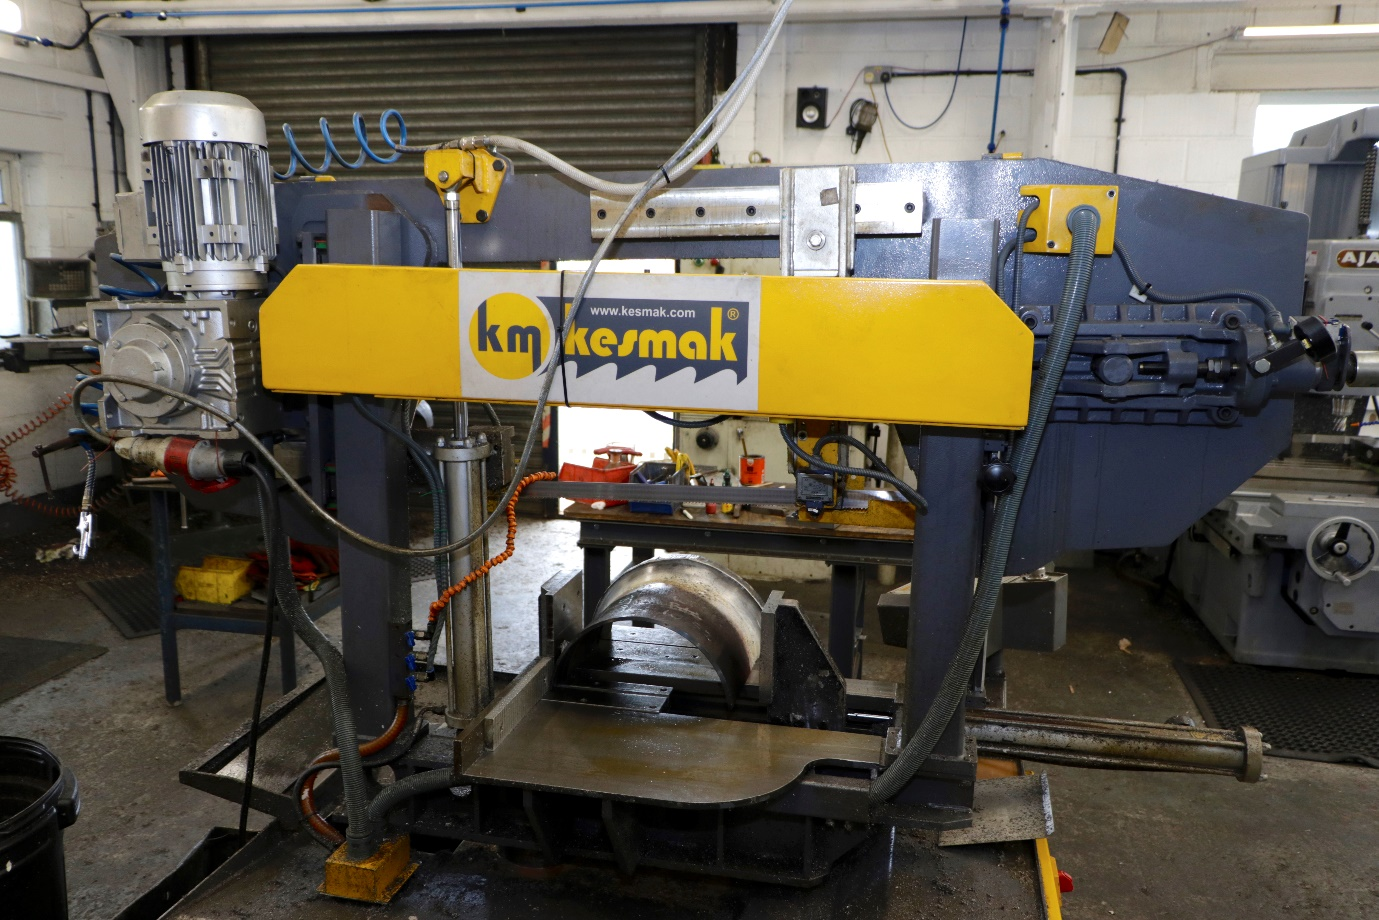 ASAMS horizontal saw capable of cutting larger items